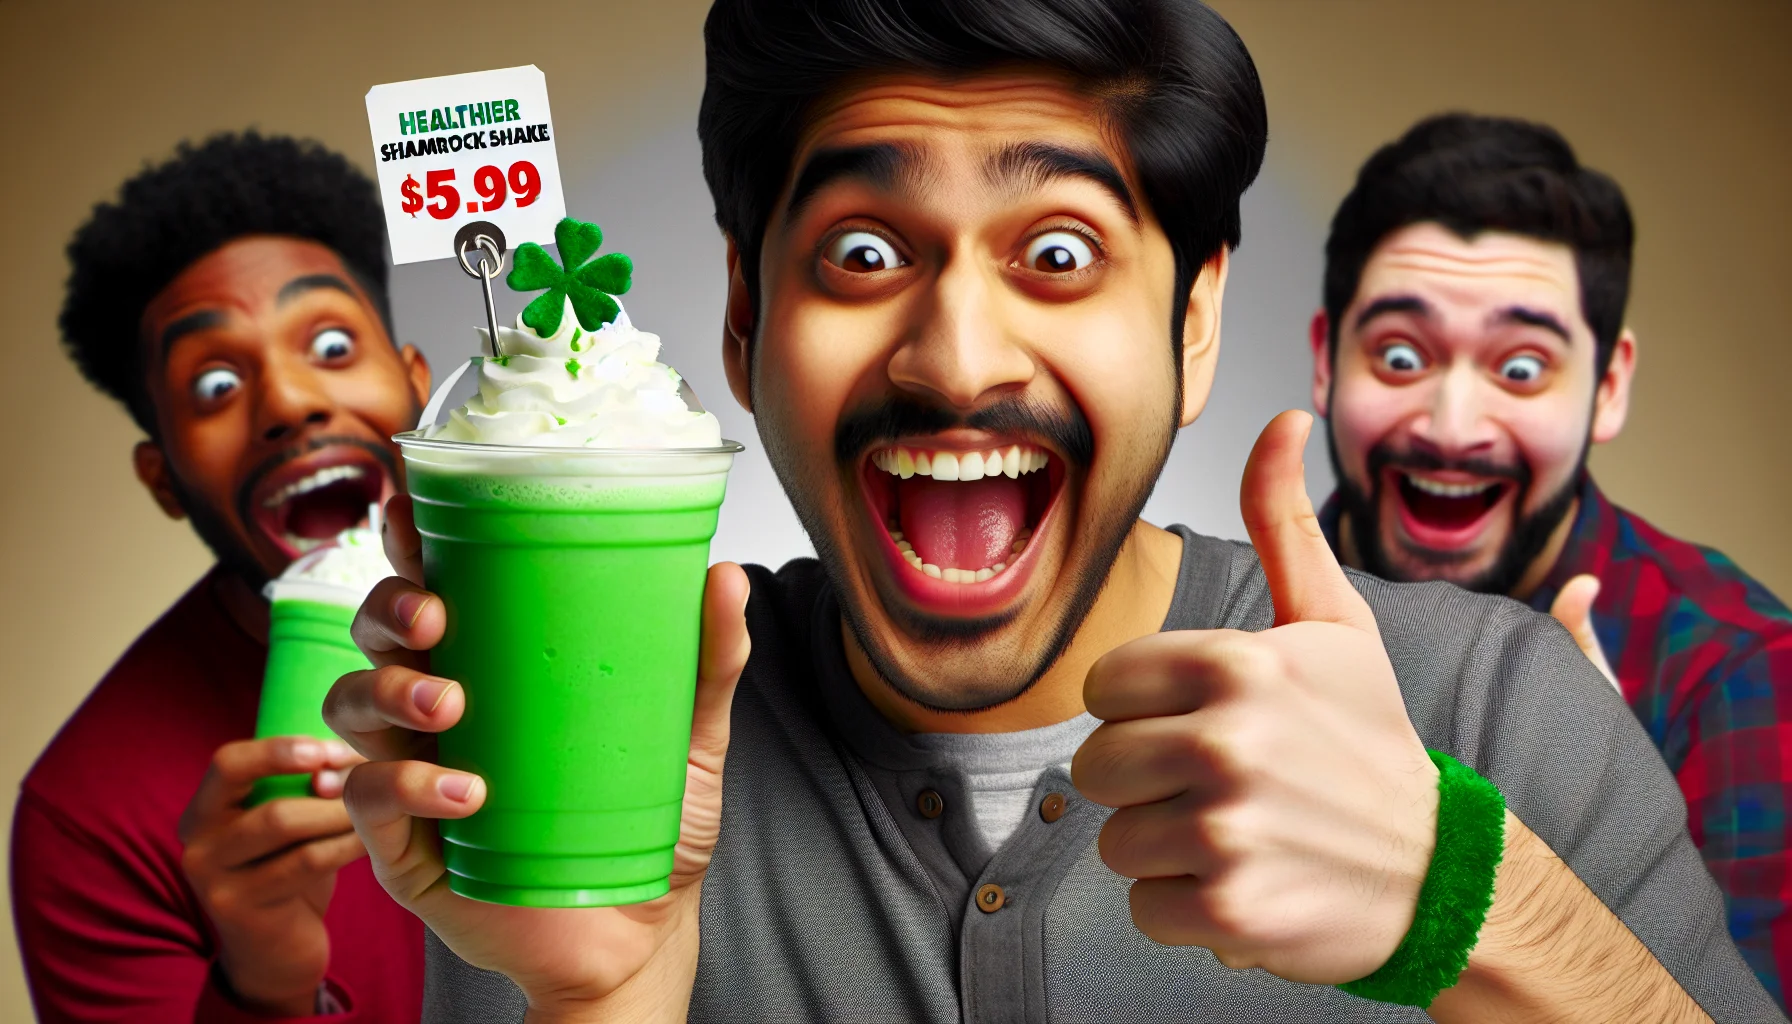 Picture a funny scenario where a sprightly person happily holds the 'Healthier Shamrock Shake' in their hand. The shake looks inviting, brilliantly green and frothy, garnished with a little green clover on top. Close by, there's a price tag dangling with an unbelievably small value, suggesting its affordability. The person, of South Asian descent, is making a quirky face and giving a thumbs-up, indicating the great taste and health benefits of the drink. On the background, there are people of Black, White, and Hispanic descent, all with amused expressions, looking longingly at the shake.